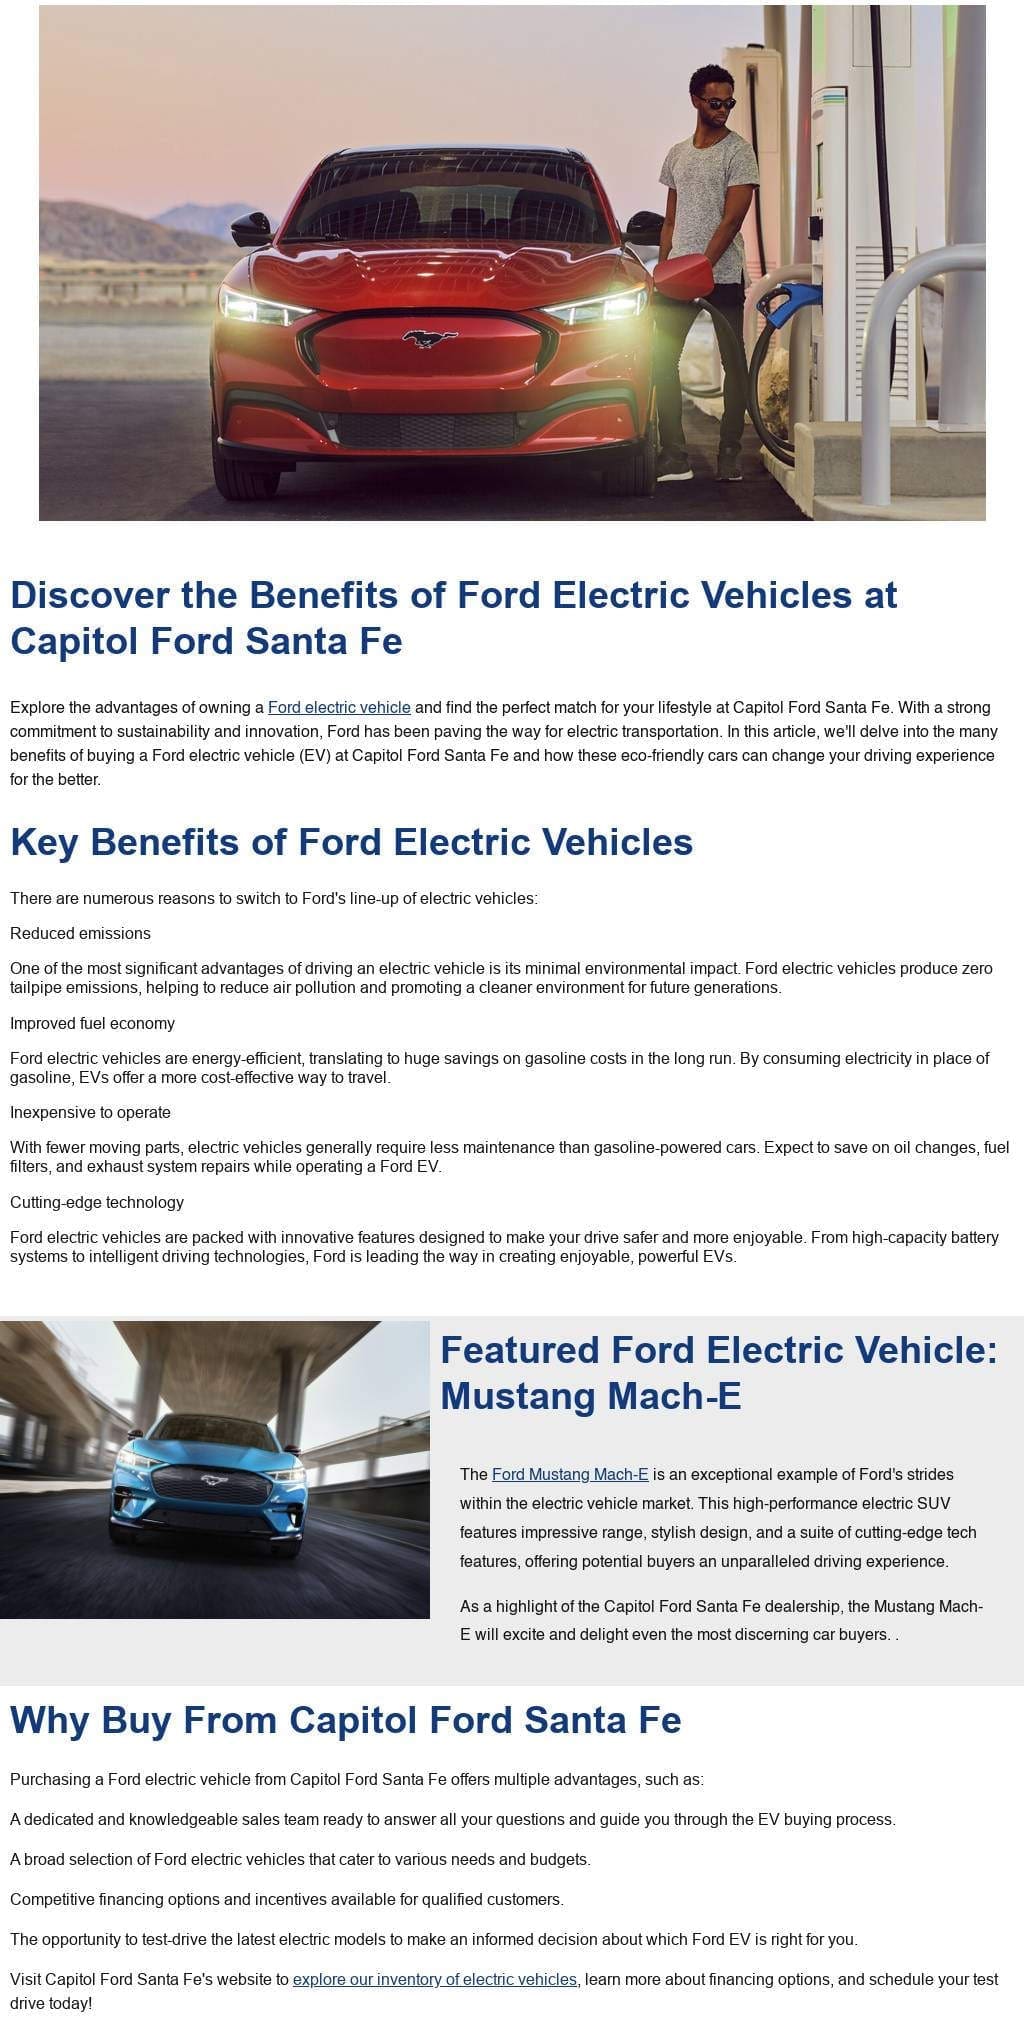 Key Features To Look For In A Ford Electric Vehicle